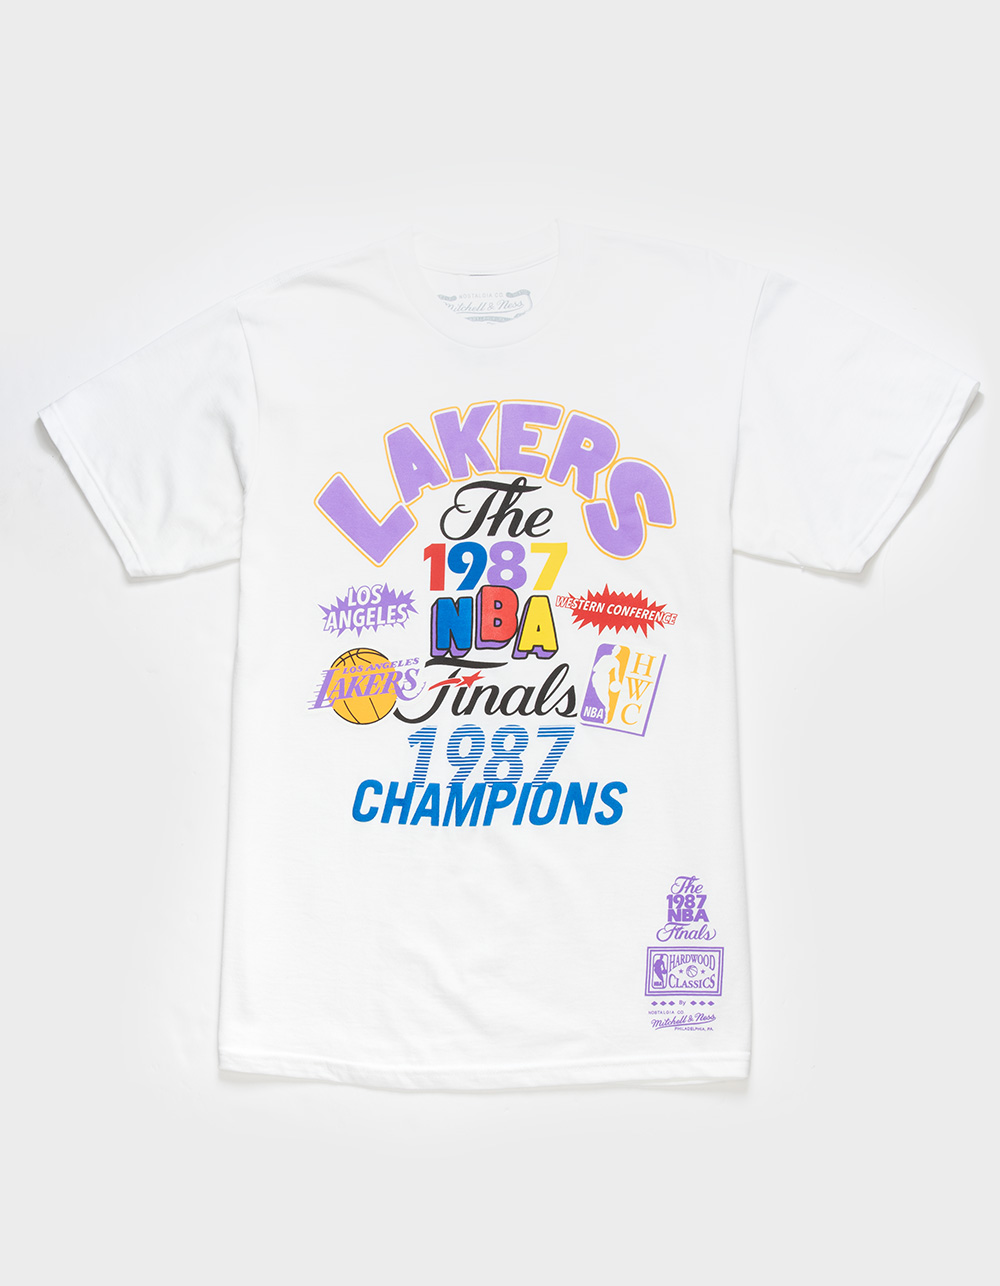 Los Angeles Lakers Western Conference T-Shirts By Mitchell & Ness